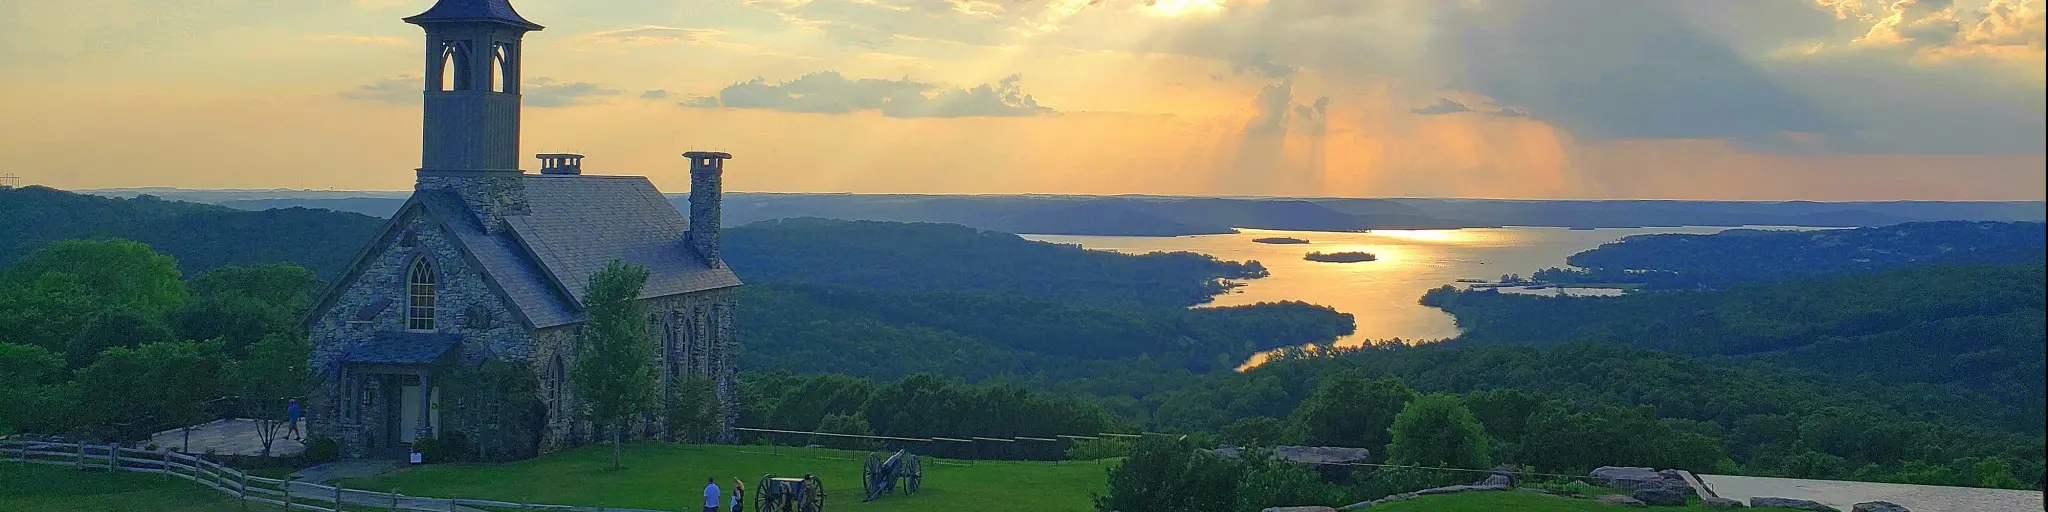 Chapel of the Ozarks in Branson, Missouri at Sunset with Table Rock Lake in the background.